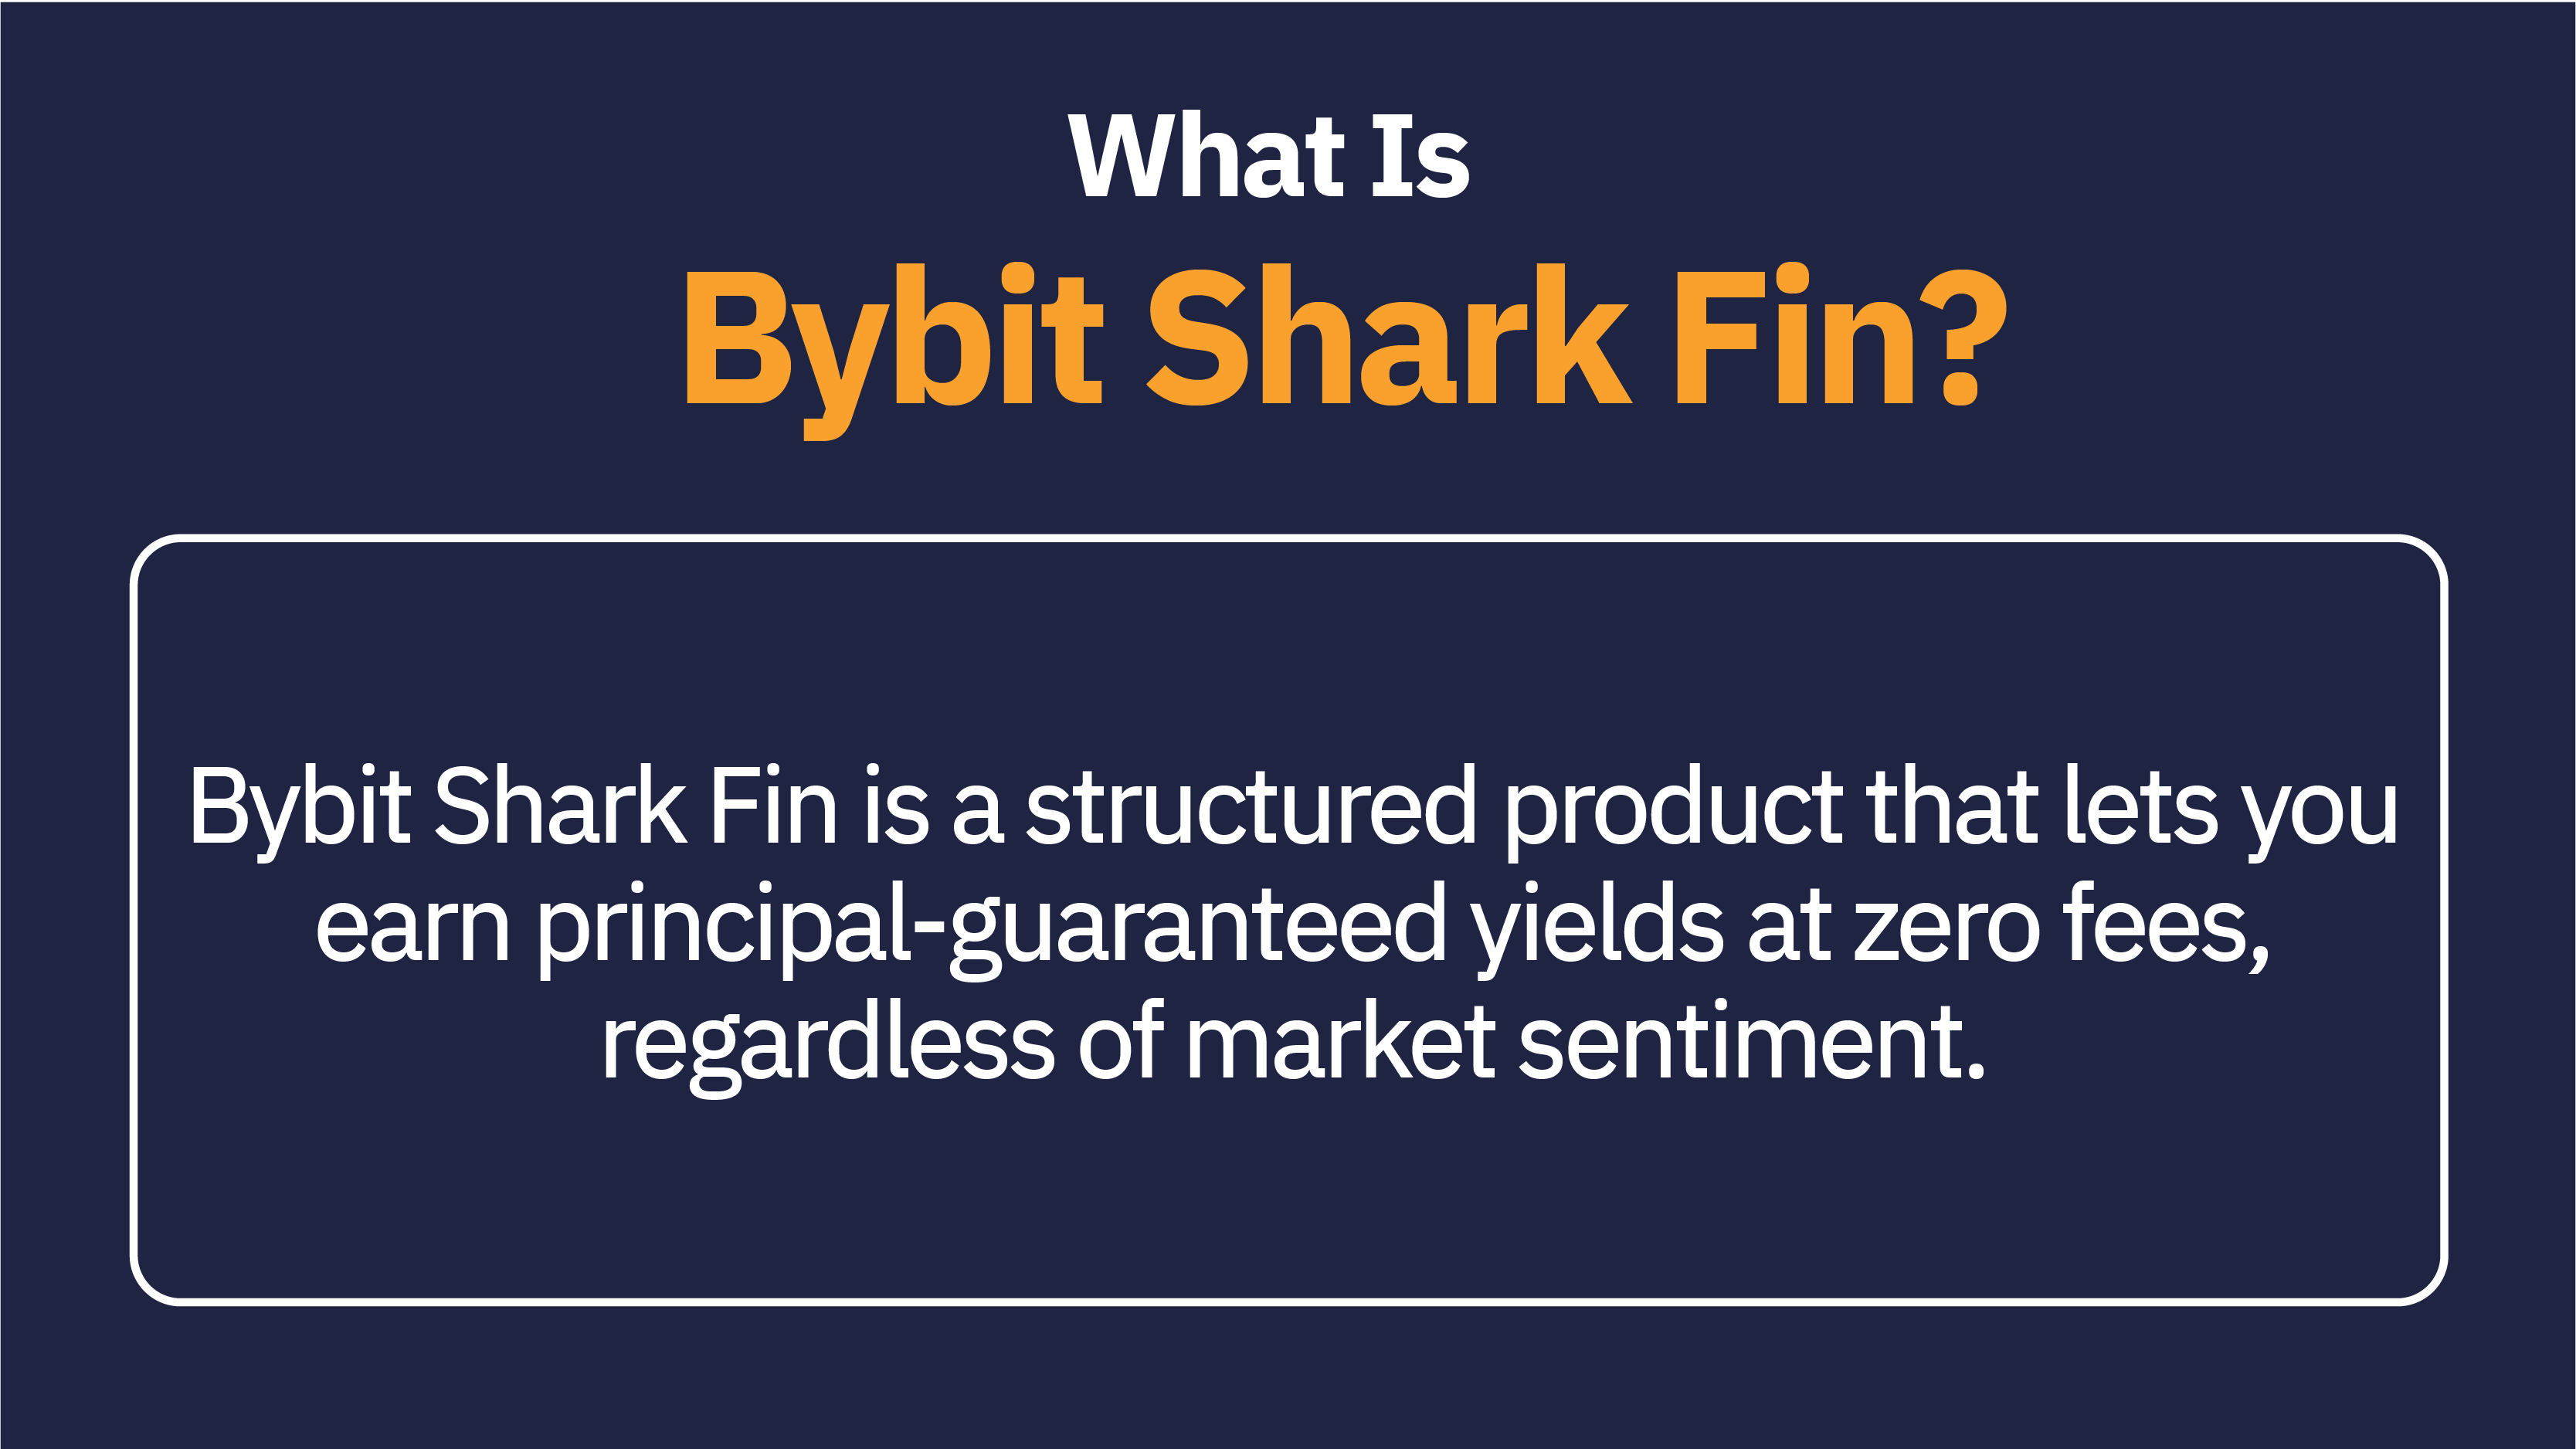 Bybit Shark Fin is a structured product that lets you earn principal-guaranteed yields at zero fees, regardless of market sentiment.